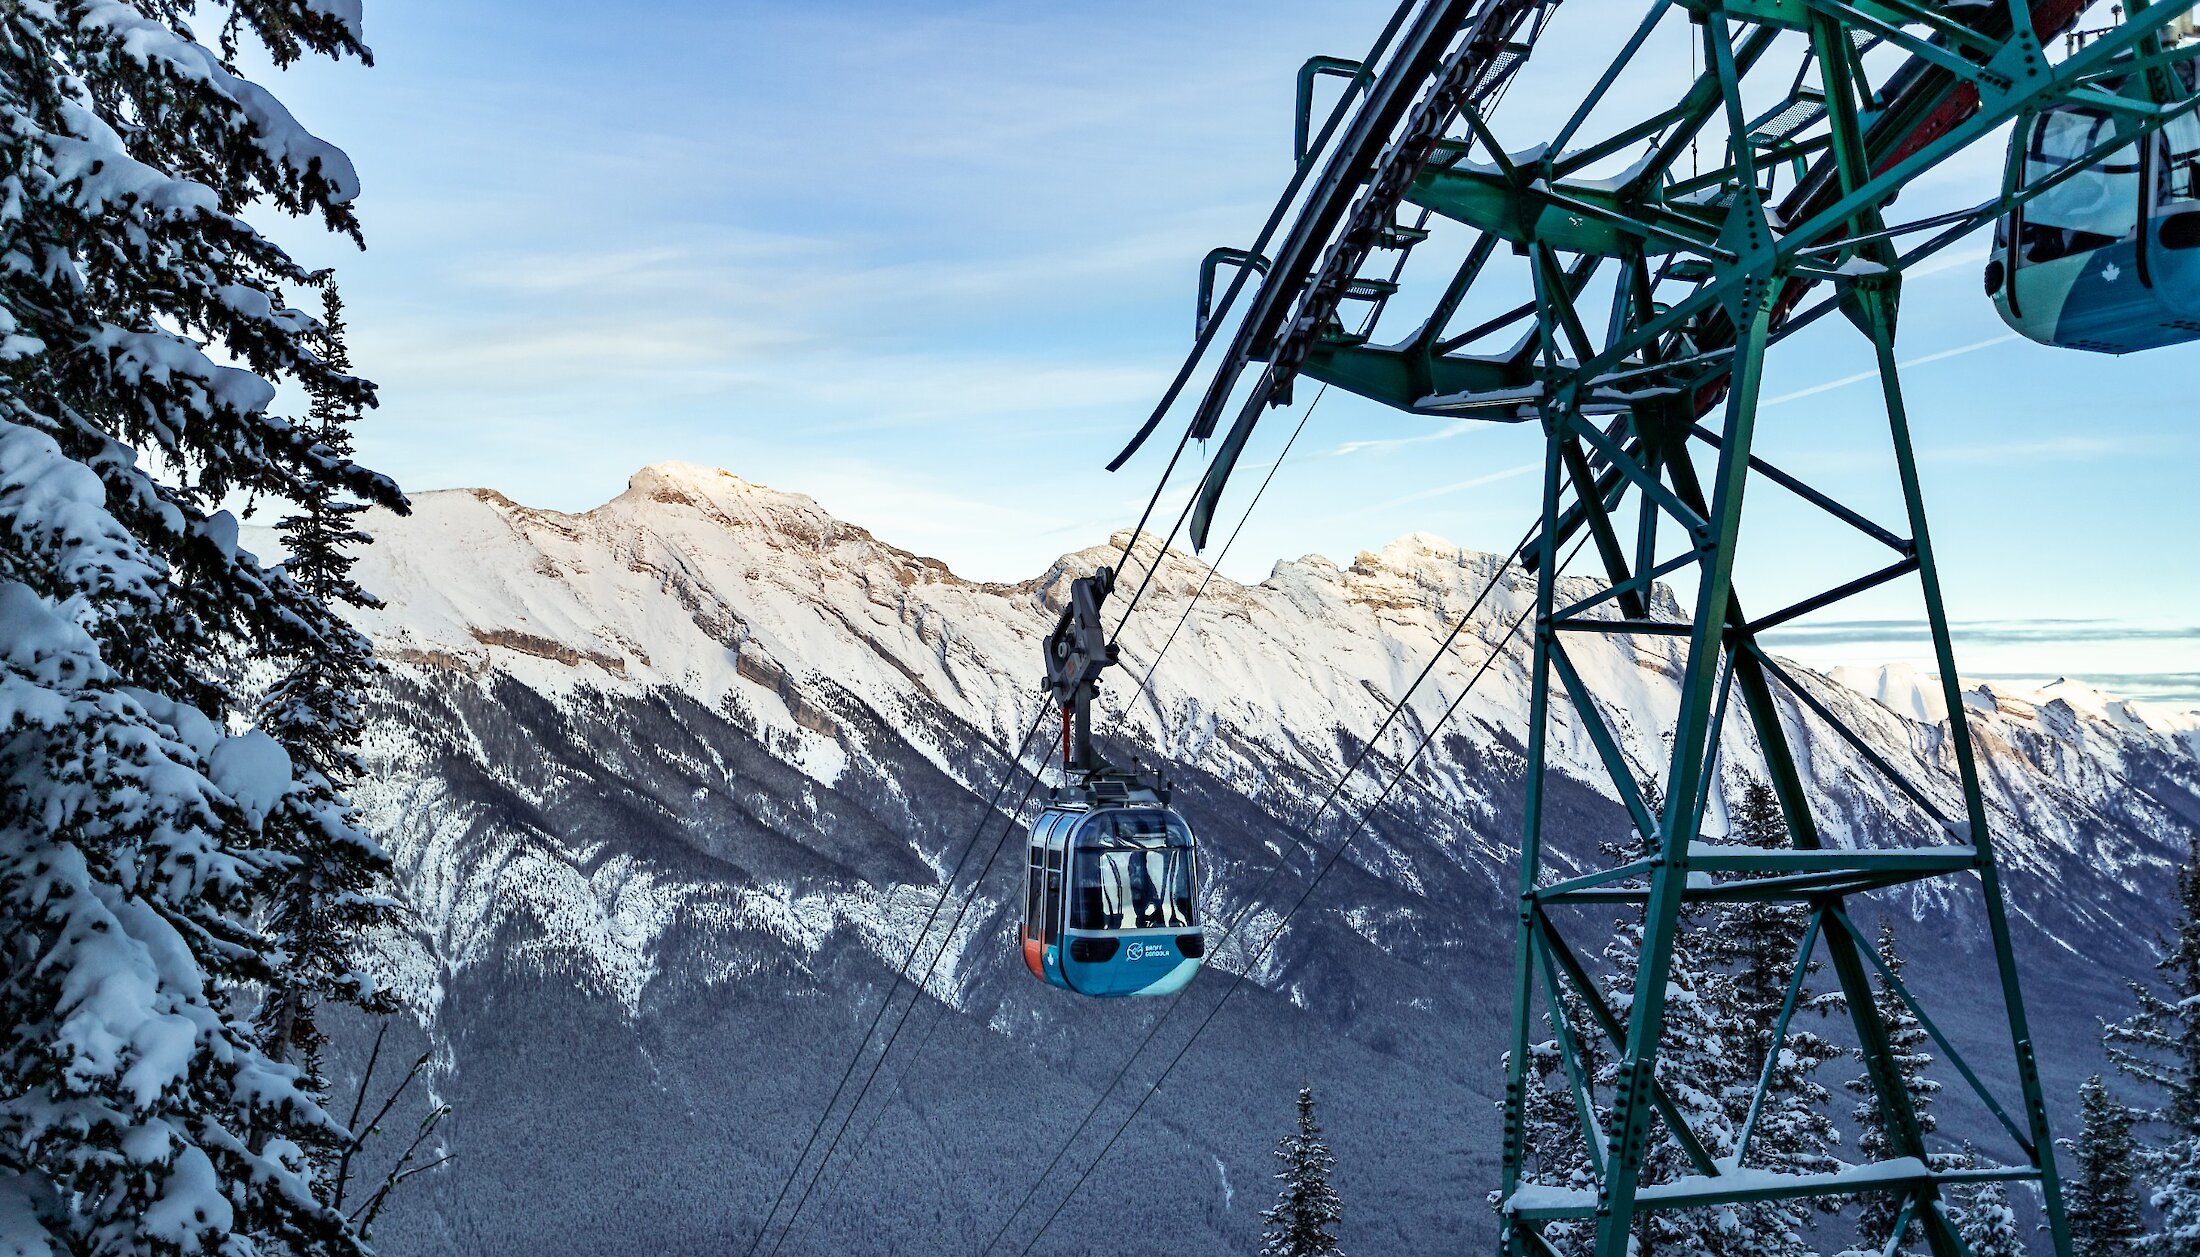 Ride to the top of the Banff Gondola in winter